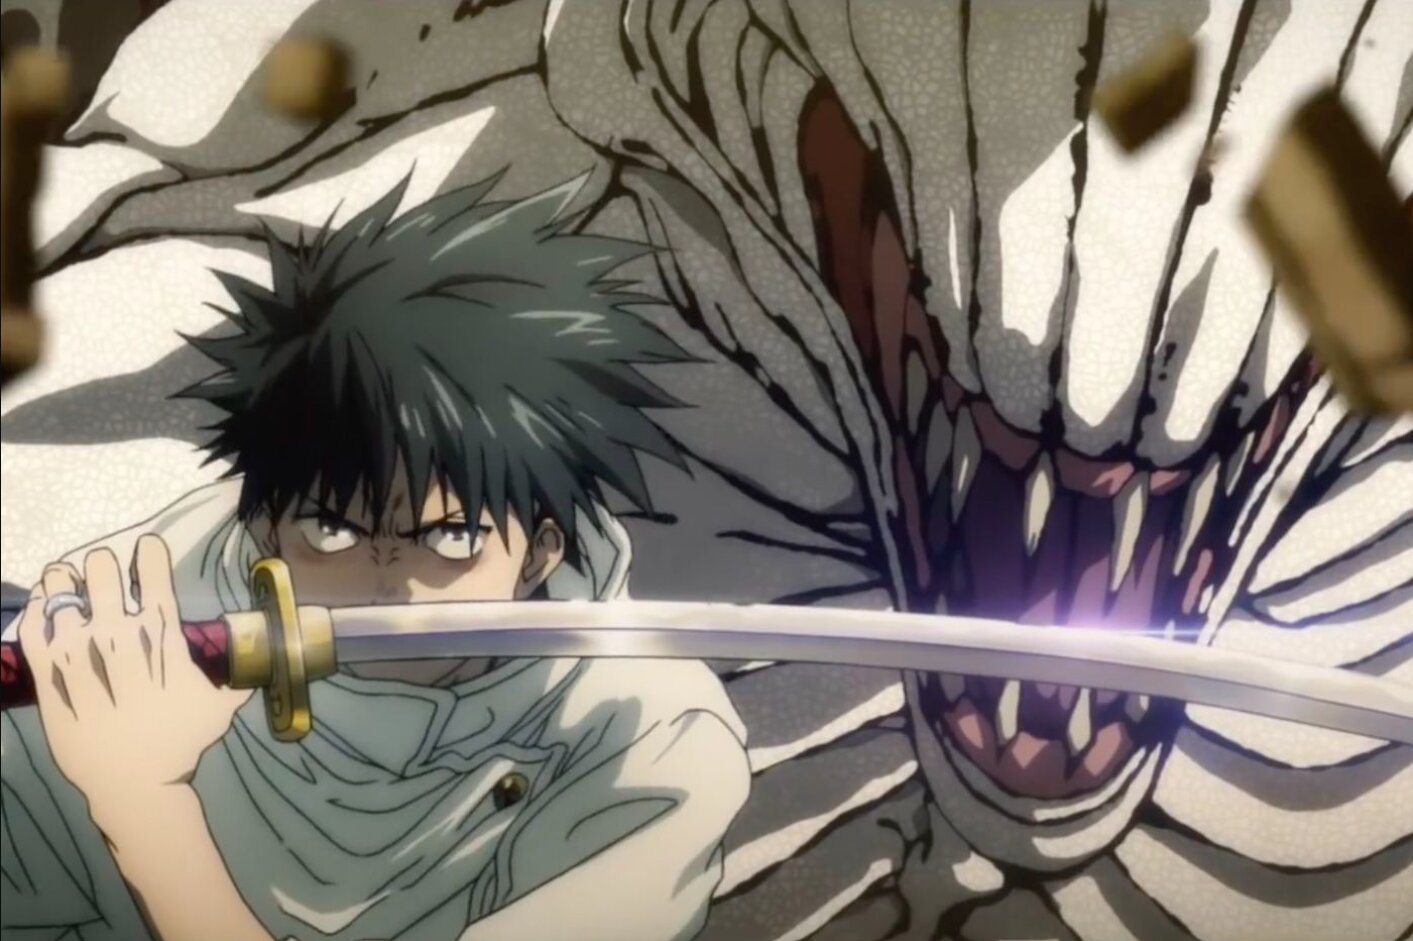 Jujutsu Kaisen 0 is finally here. Find out how to stream Fantasy Anime Action Movies online for free.